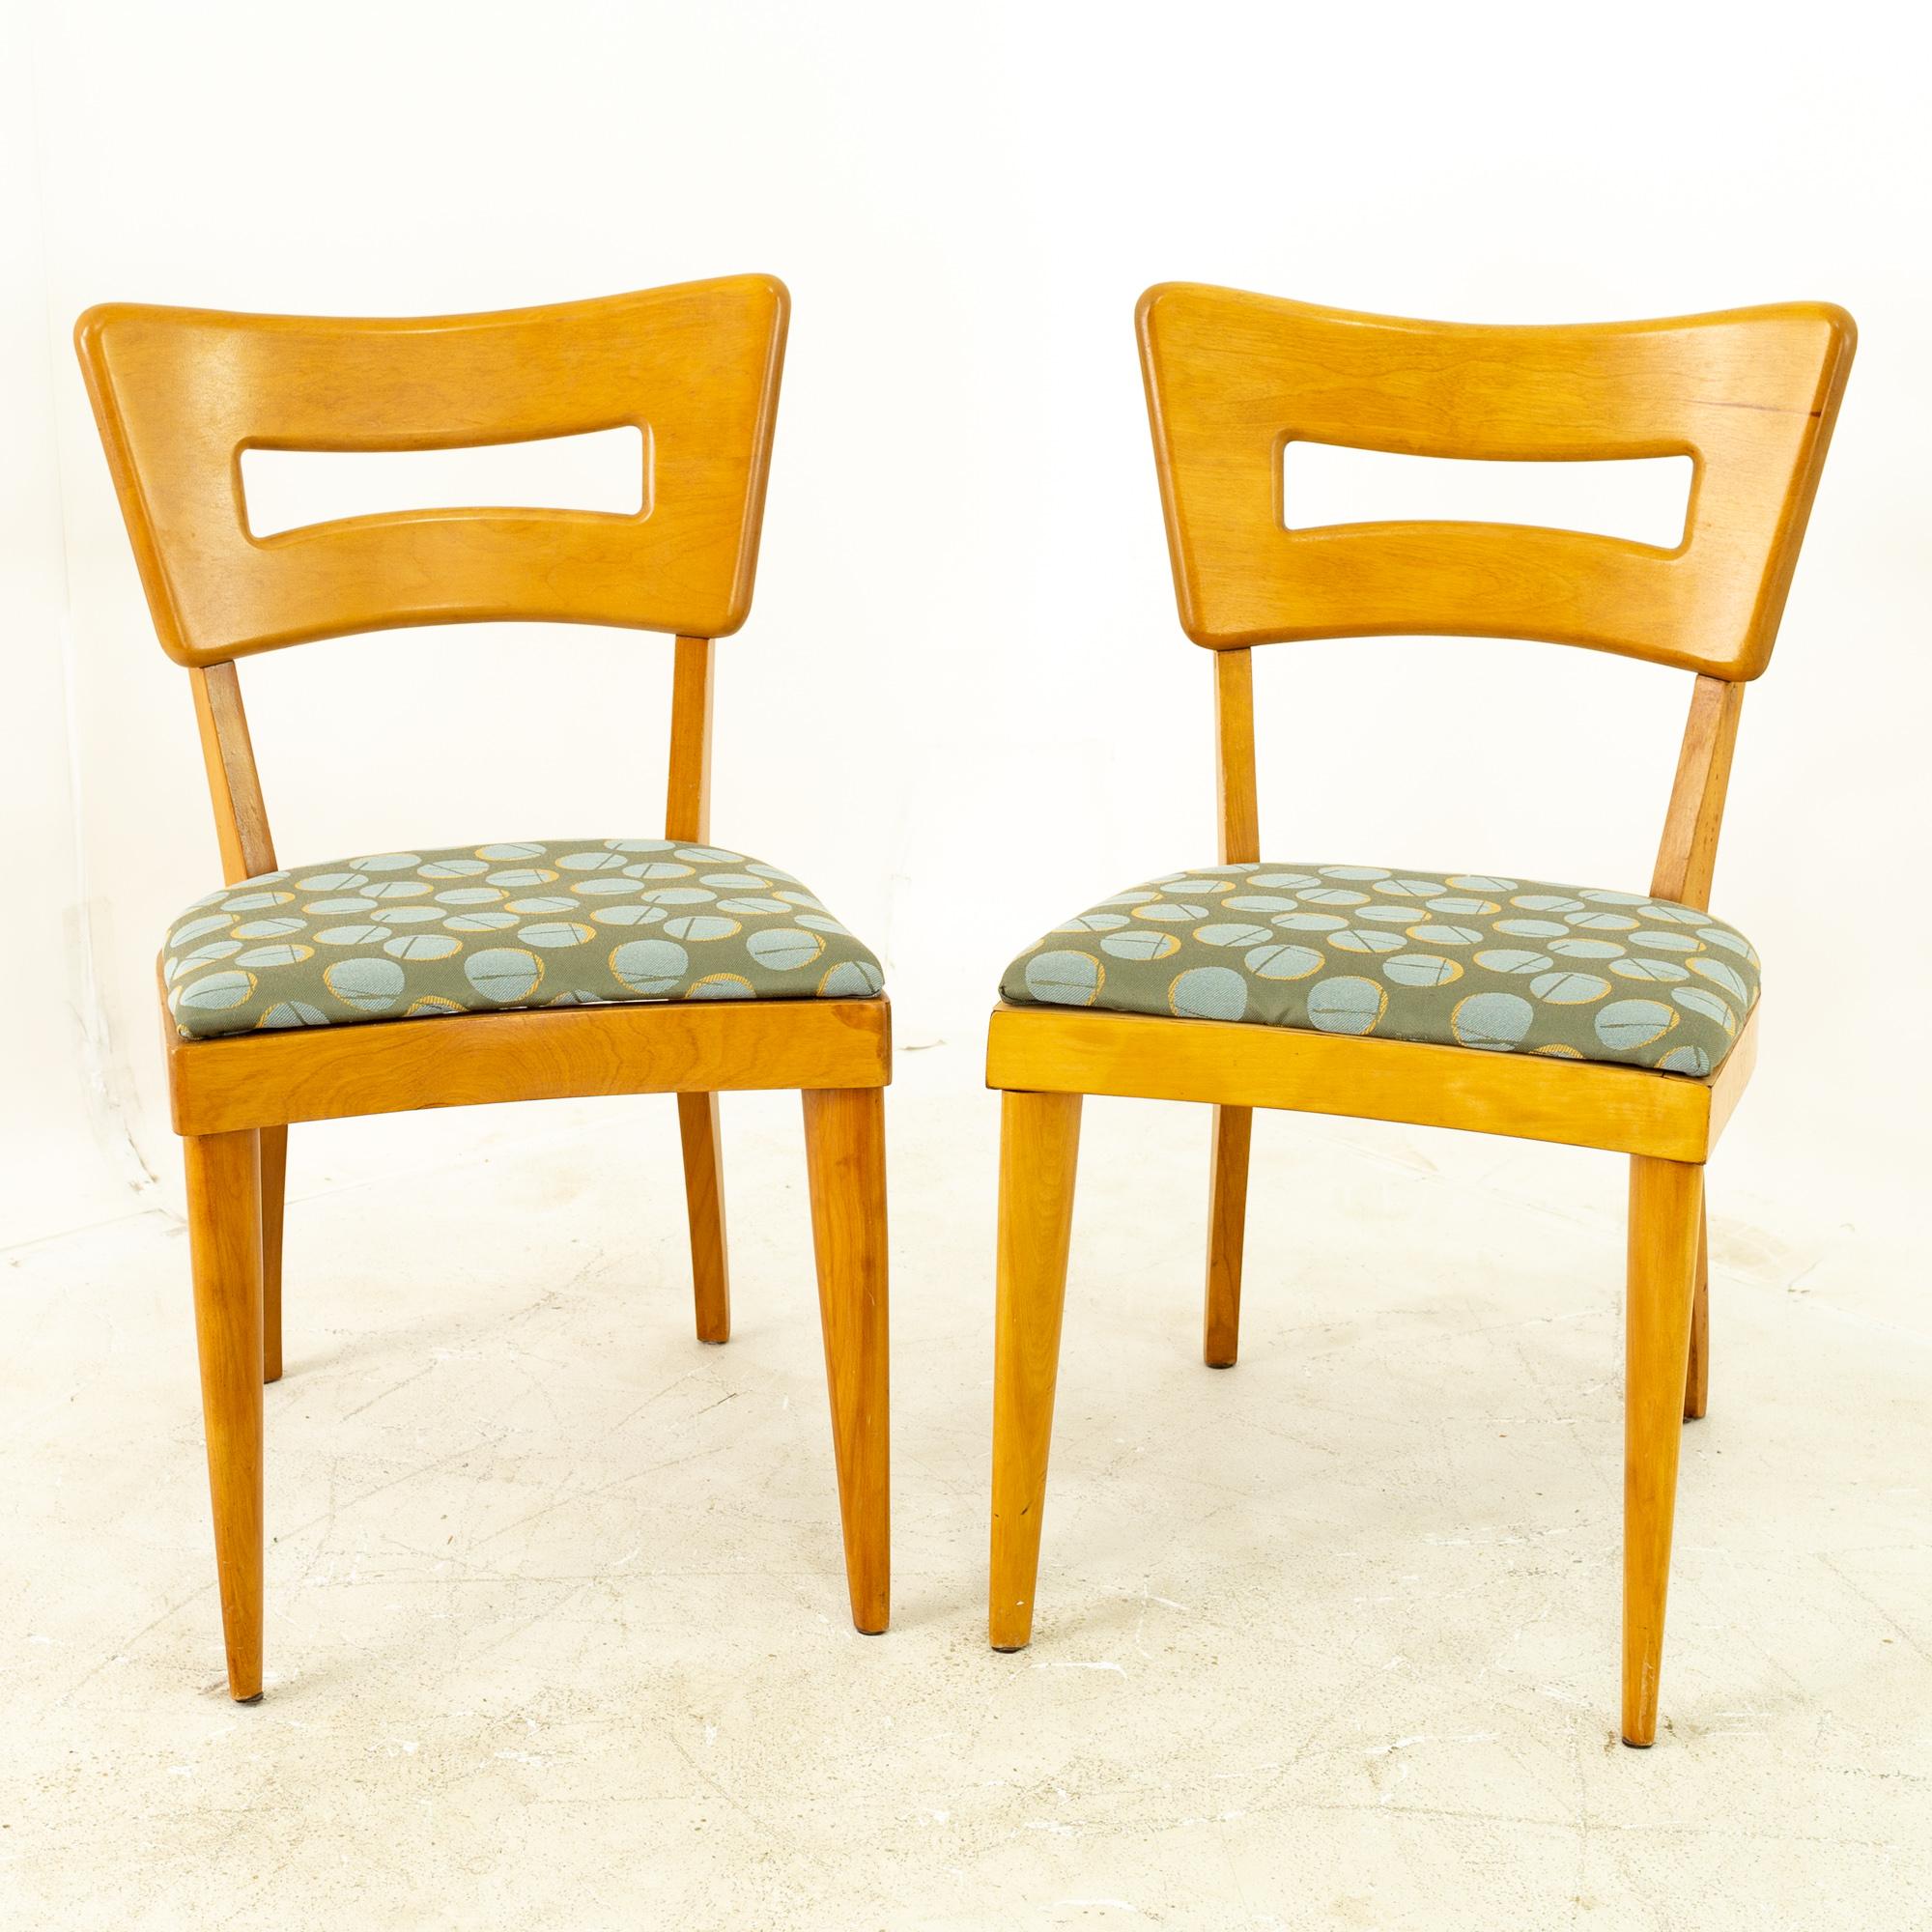 Heywood Wakefield mid century maple dog bone dining chairs - pair

Each chair measures 18 wide x 20 deep x 33 high with a seat height of 18 inches

All pieces of furniture can be had in what we call restored vintage condition. That means the